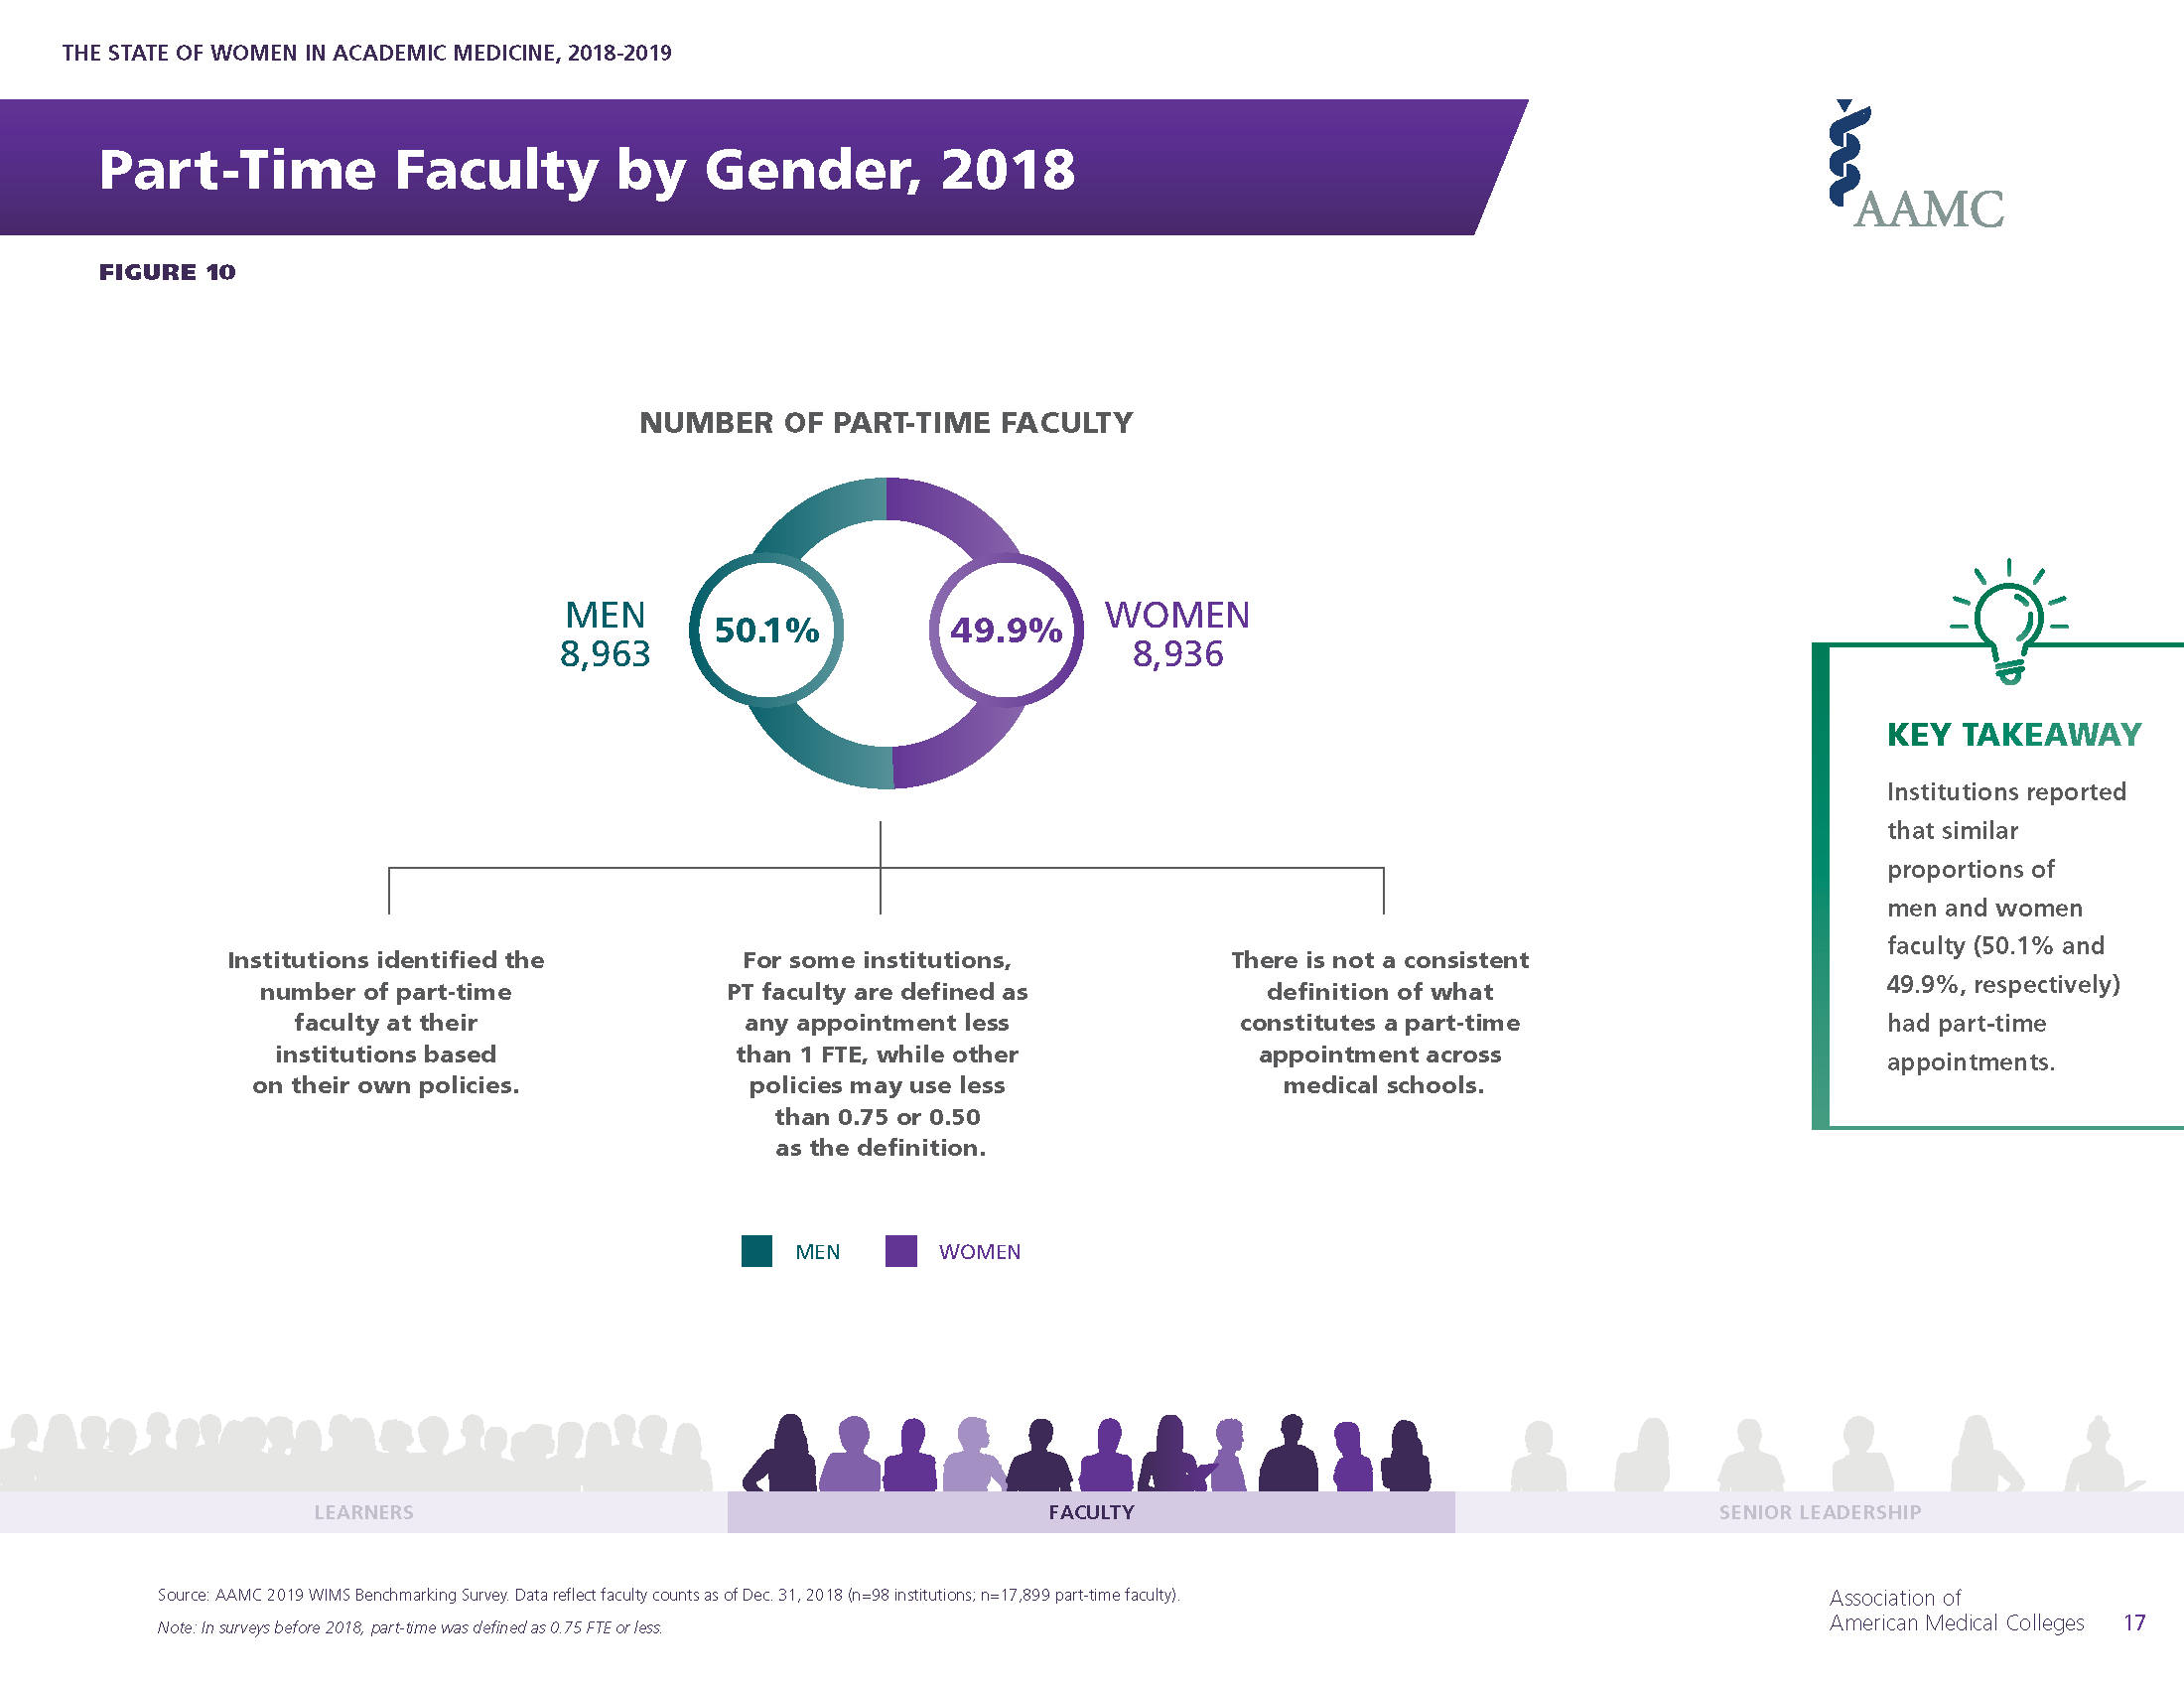 The State of Women in Academic Medicine 2018-2019 Part-Time Faculty by Gender